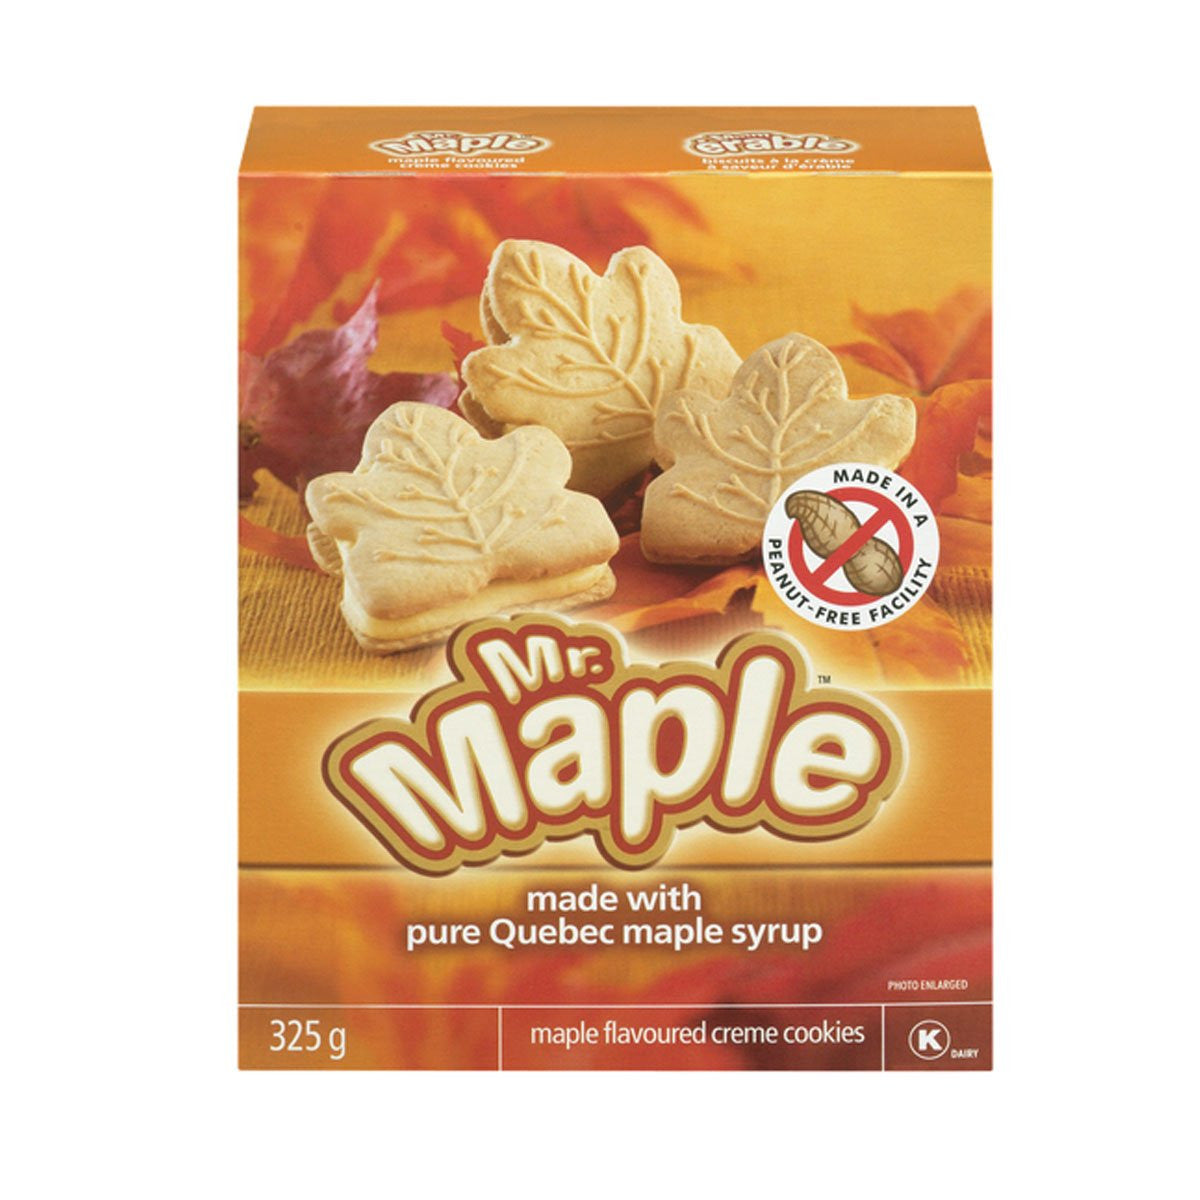 Mr. Maple Maple Flavoured Creme Cookies 325g/11.5 oz., - {Imported from Canada}